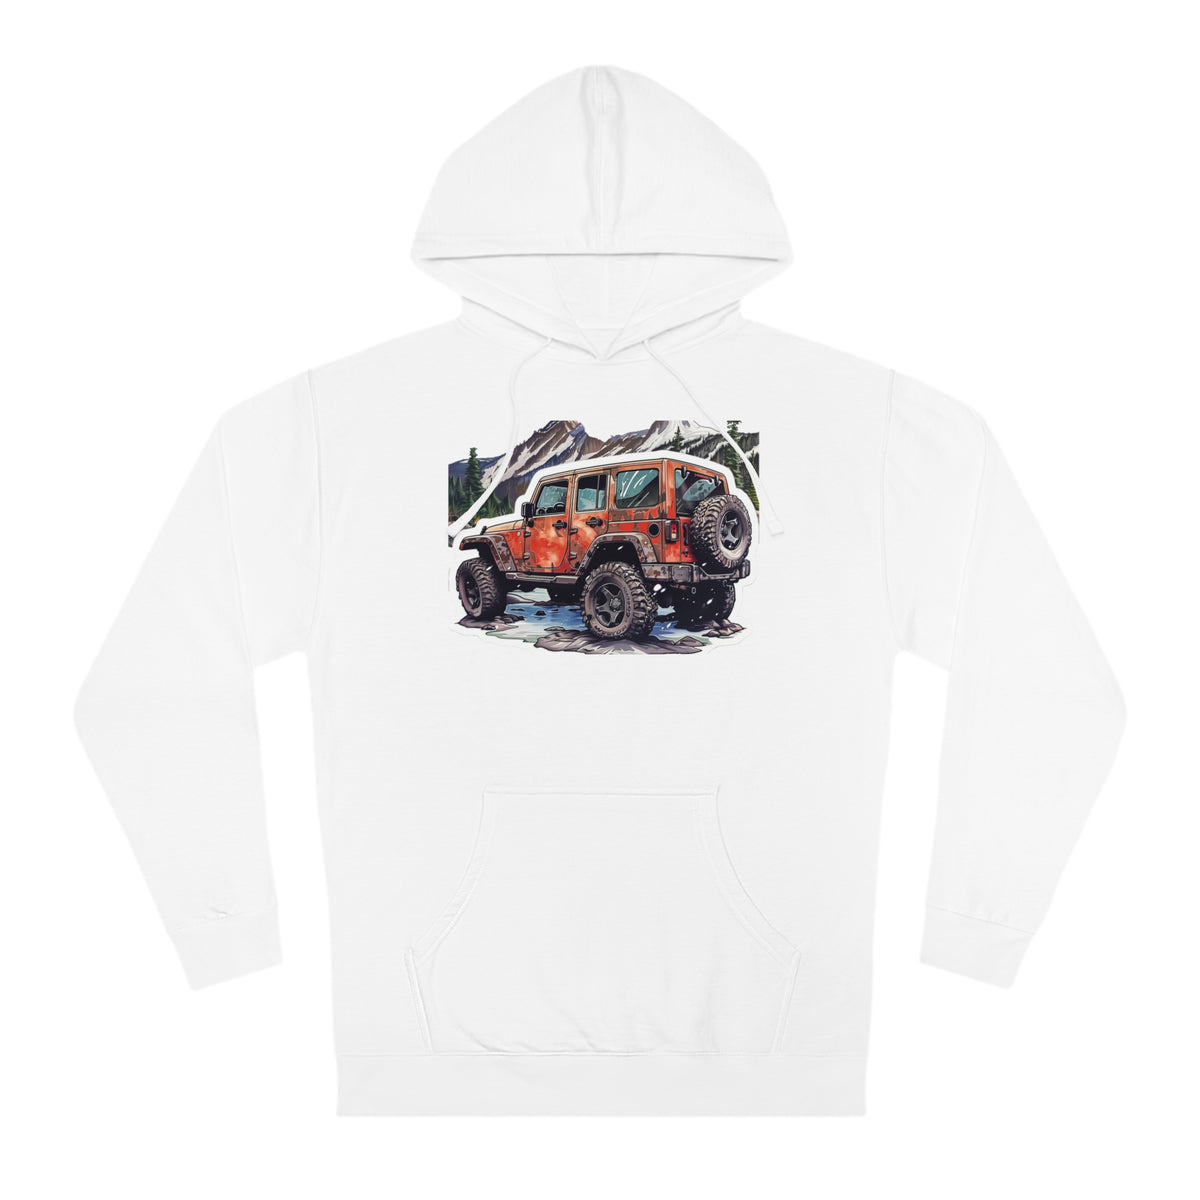 Rugged Terrain Enthusiast Hoodie with Majestic Off-Roader Graphic Hooded Sweatshirt